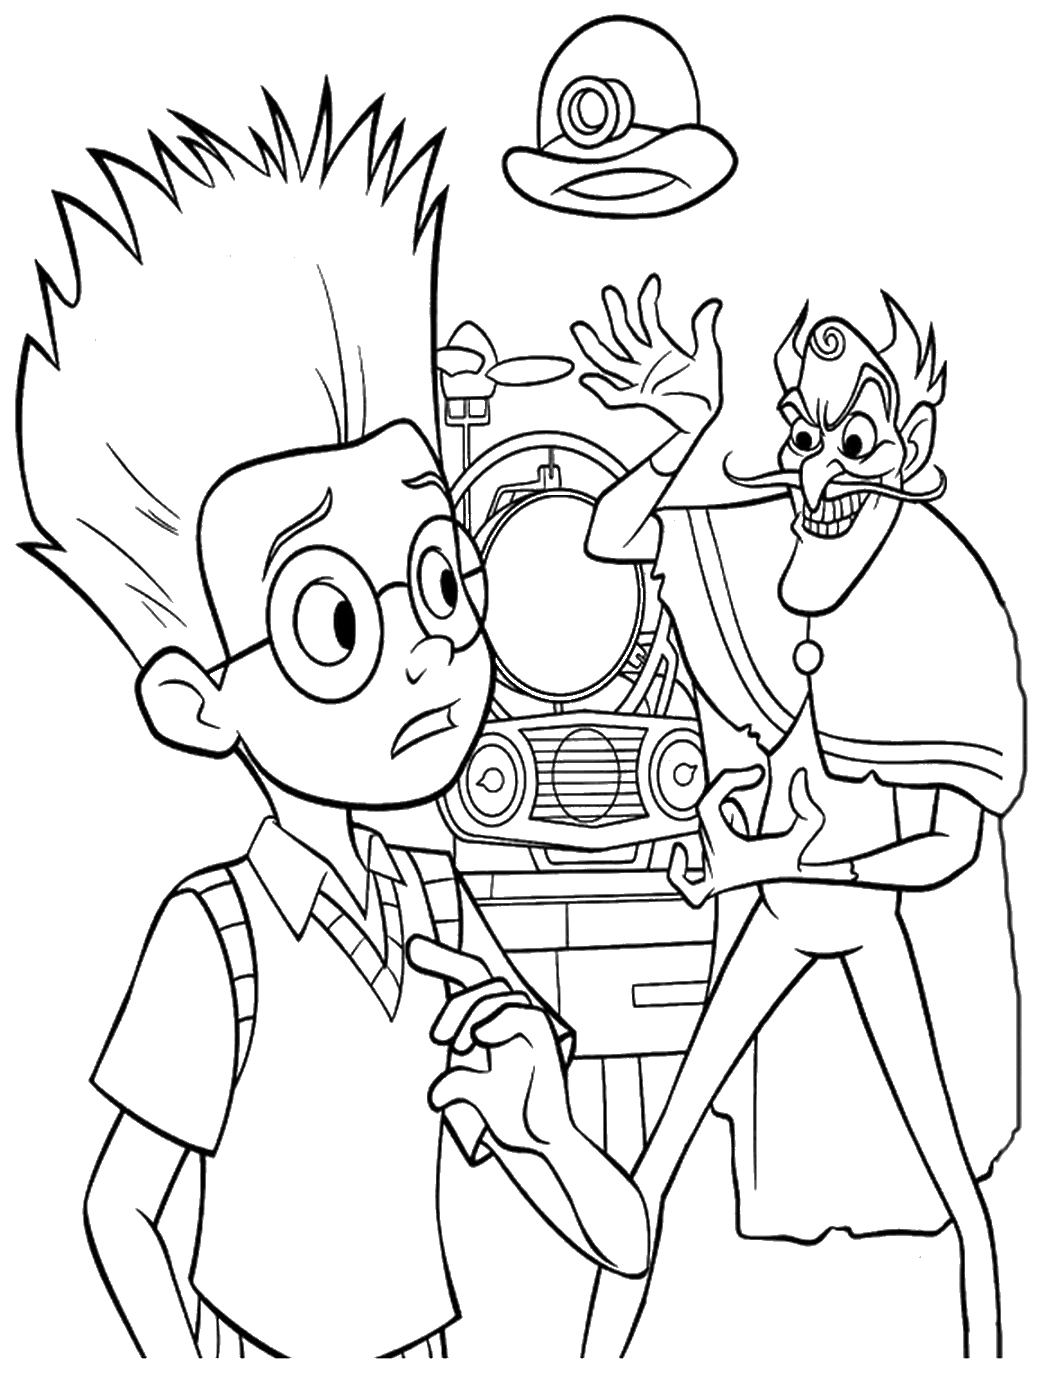 Meet the Robinsons Coloring Pages TV Film Printable 2020 04960 Coloring4free